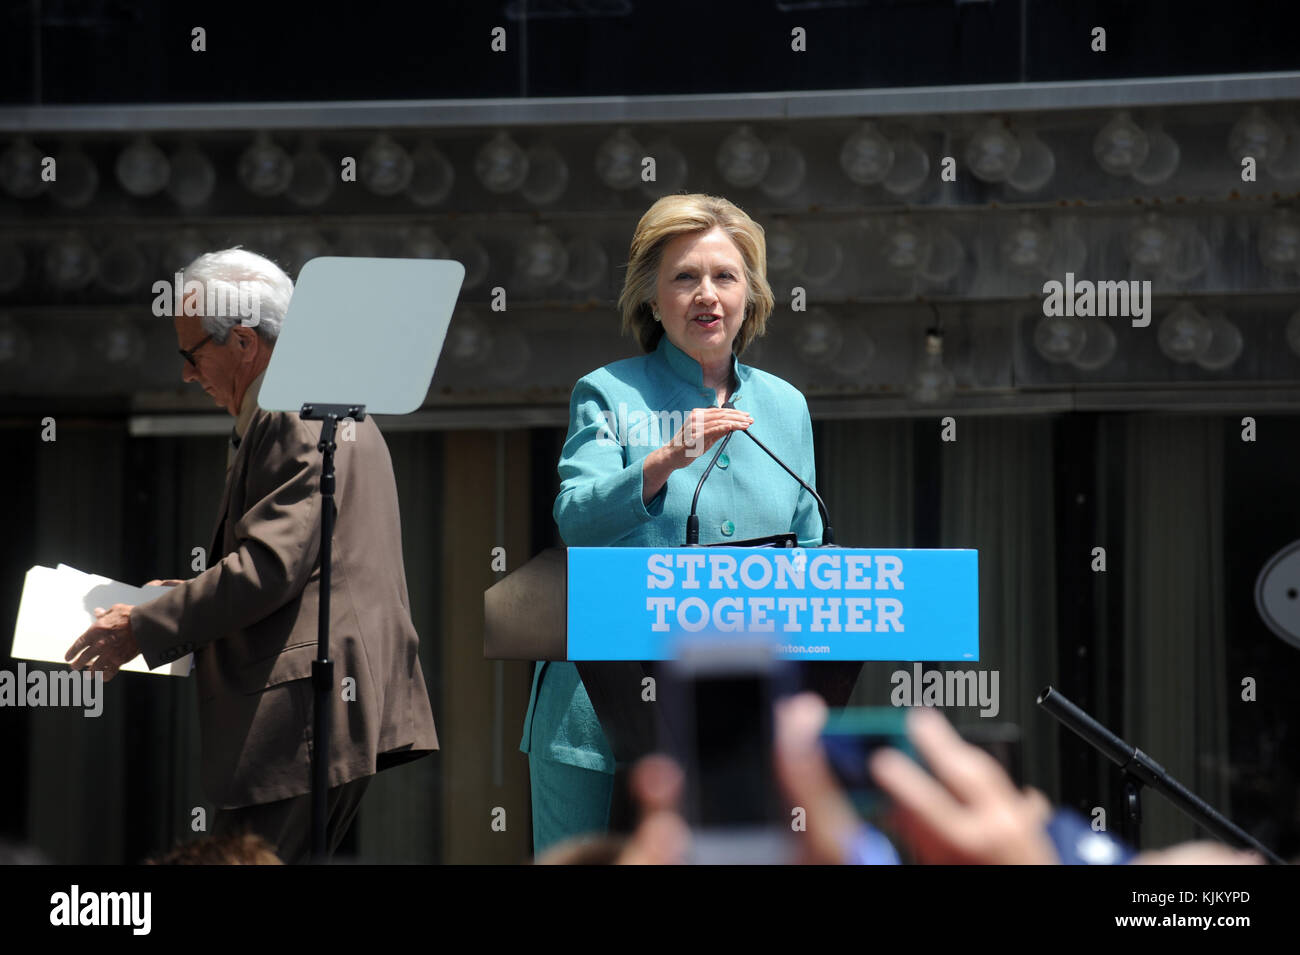 ATLANTIC CITY, NJ - JULY 06: Presumptive Democratic presidential nominee Hillary Clinton speaks at the podium at Boardwalk Hall Arena on July 6, 2016 in Atlantic City, New Jersey   People:  Hillary Clinton Stock Photo